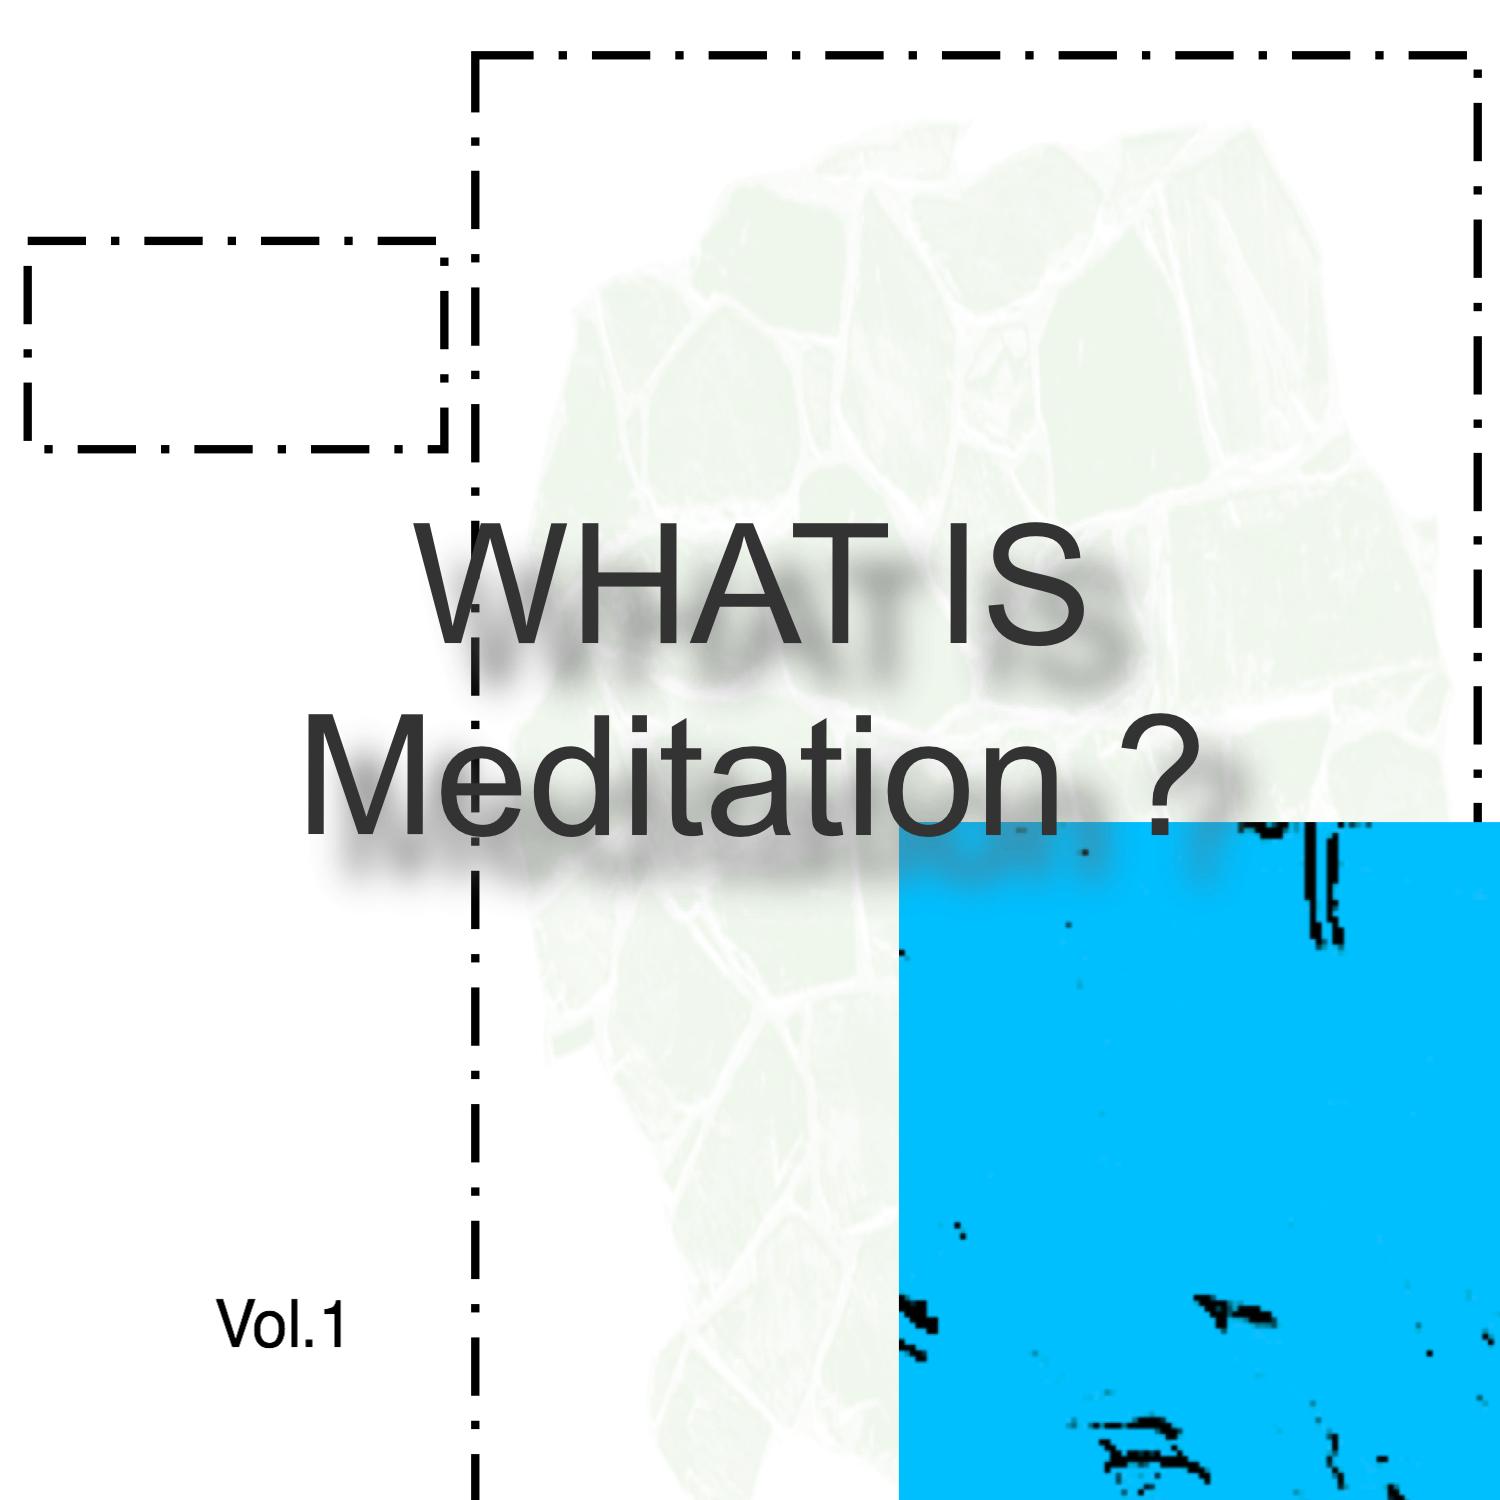 What Is Meditation? Vol.1